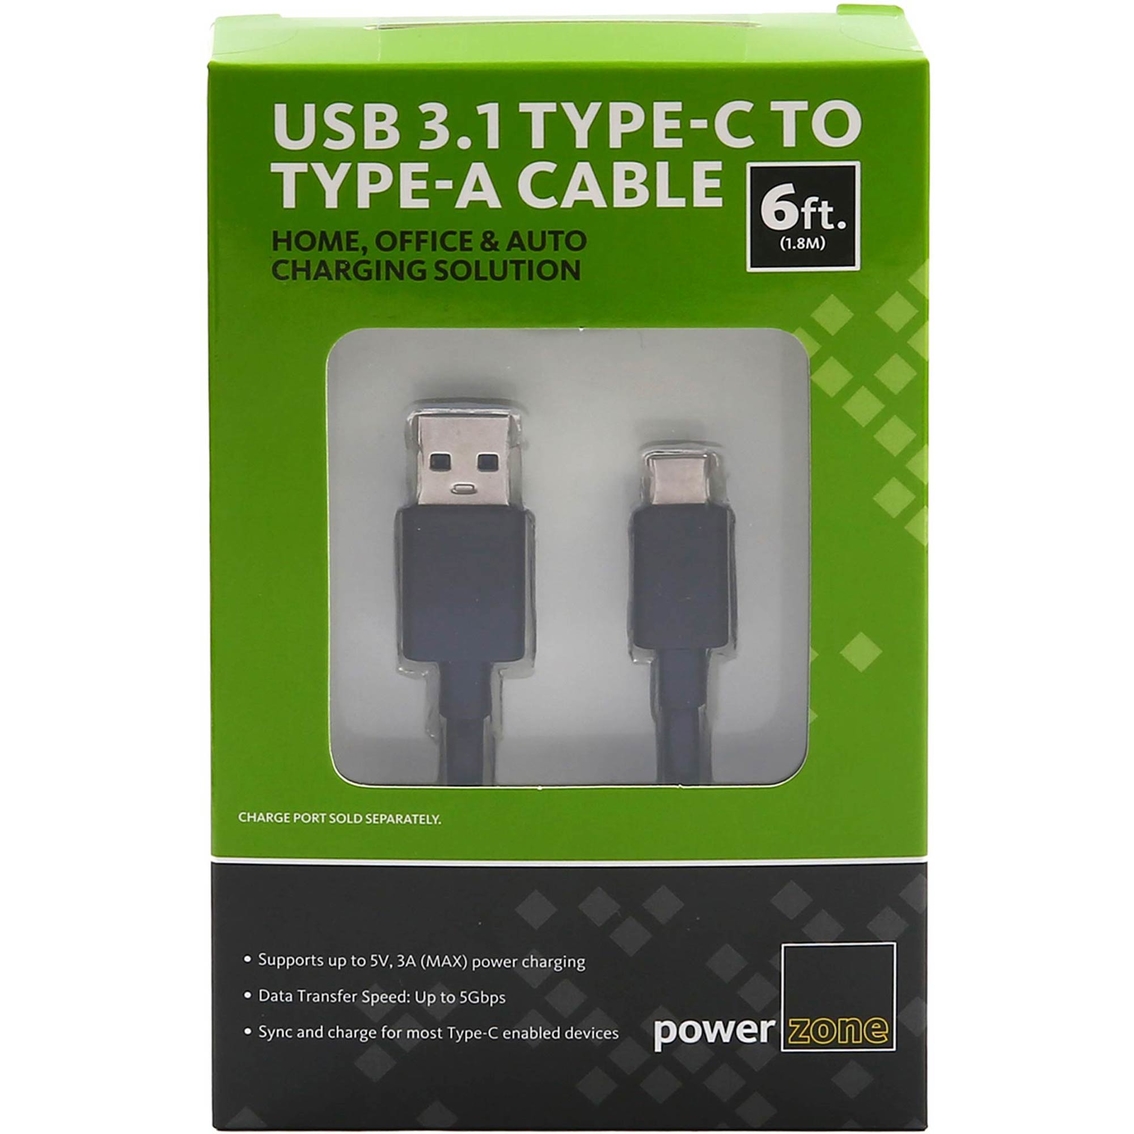 USB3.1 Type C to USB-A Cable 6ft BLK - Image 1 of 3